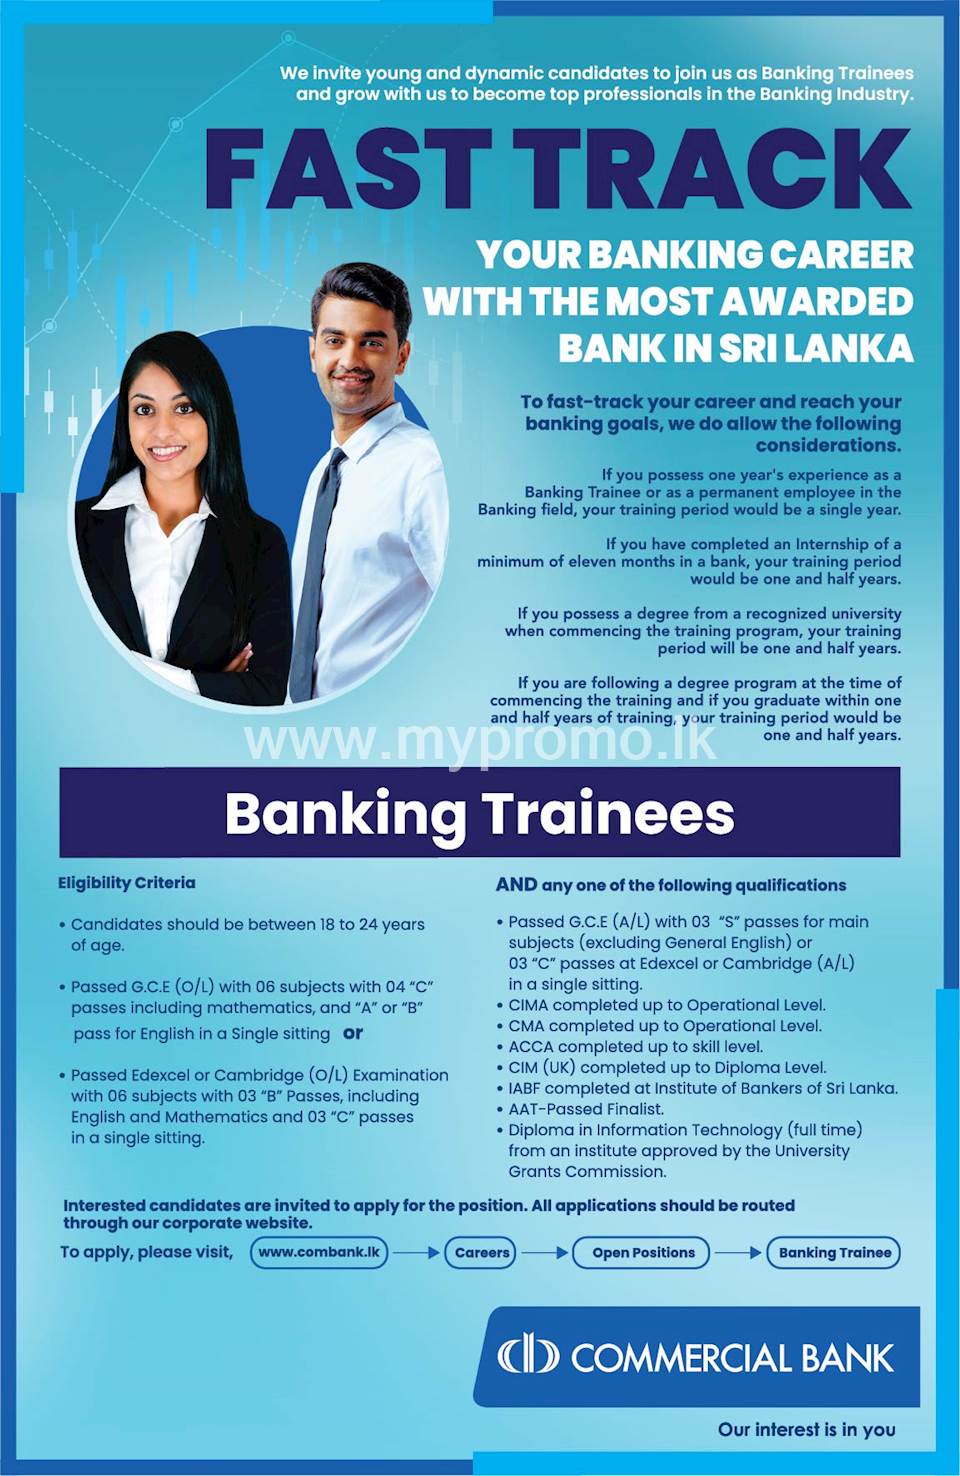 Banking Trainees